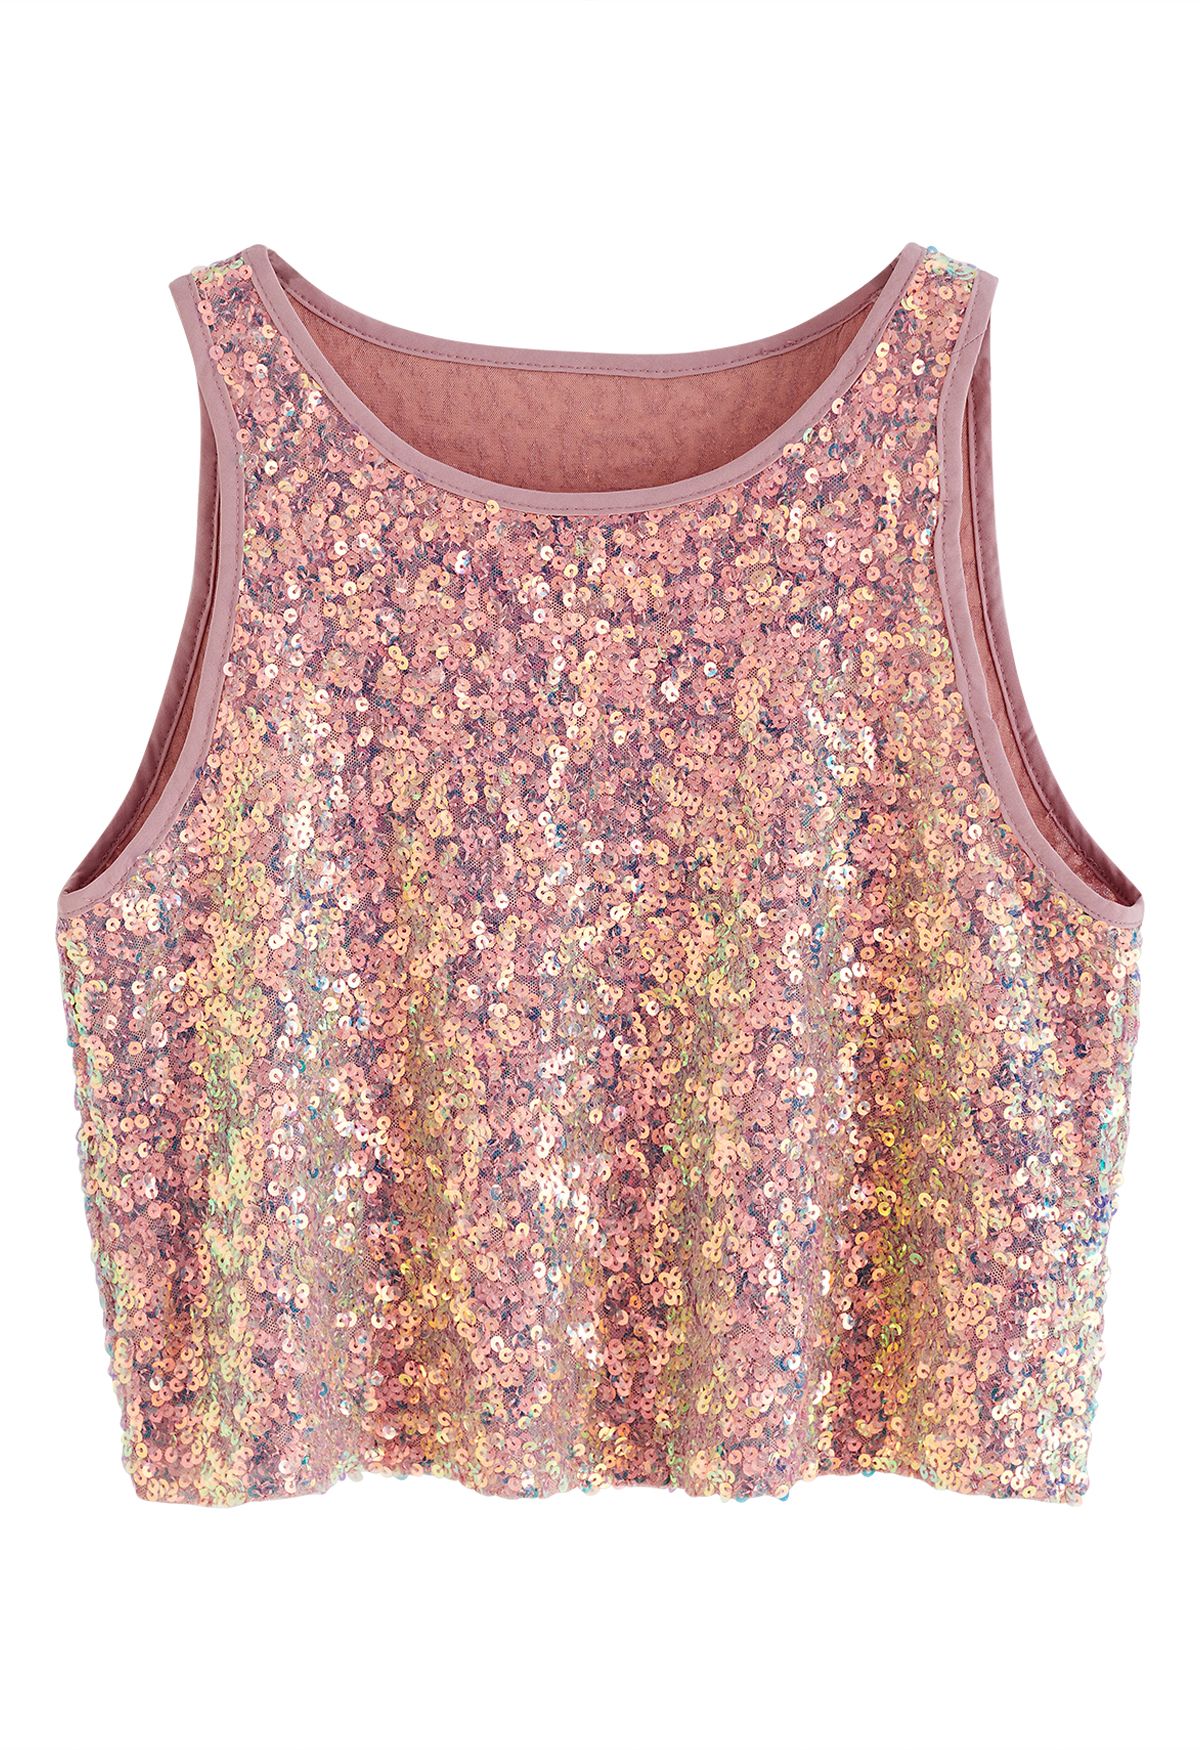 Ultra Sparkle Sequined Tank Top in Pink - Retro, Indie and Unique Fashion